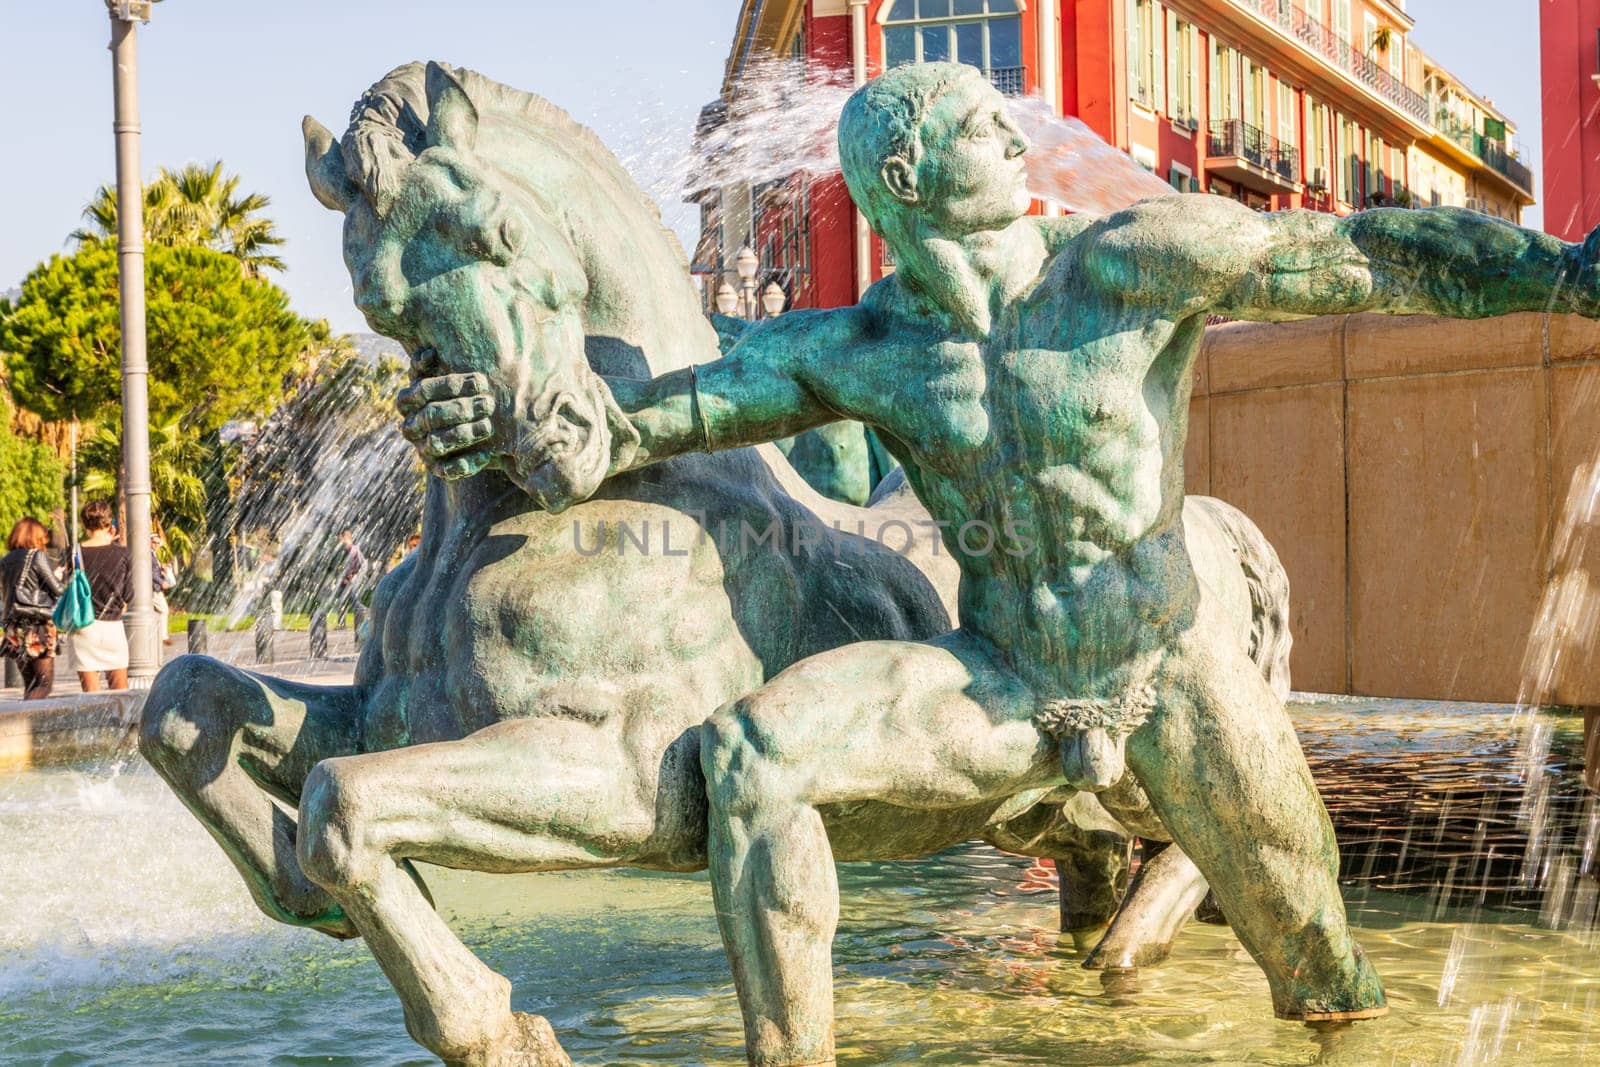 Fountain Soleil on Place Massena in Nice, France, Frech Riviera